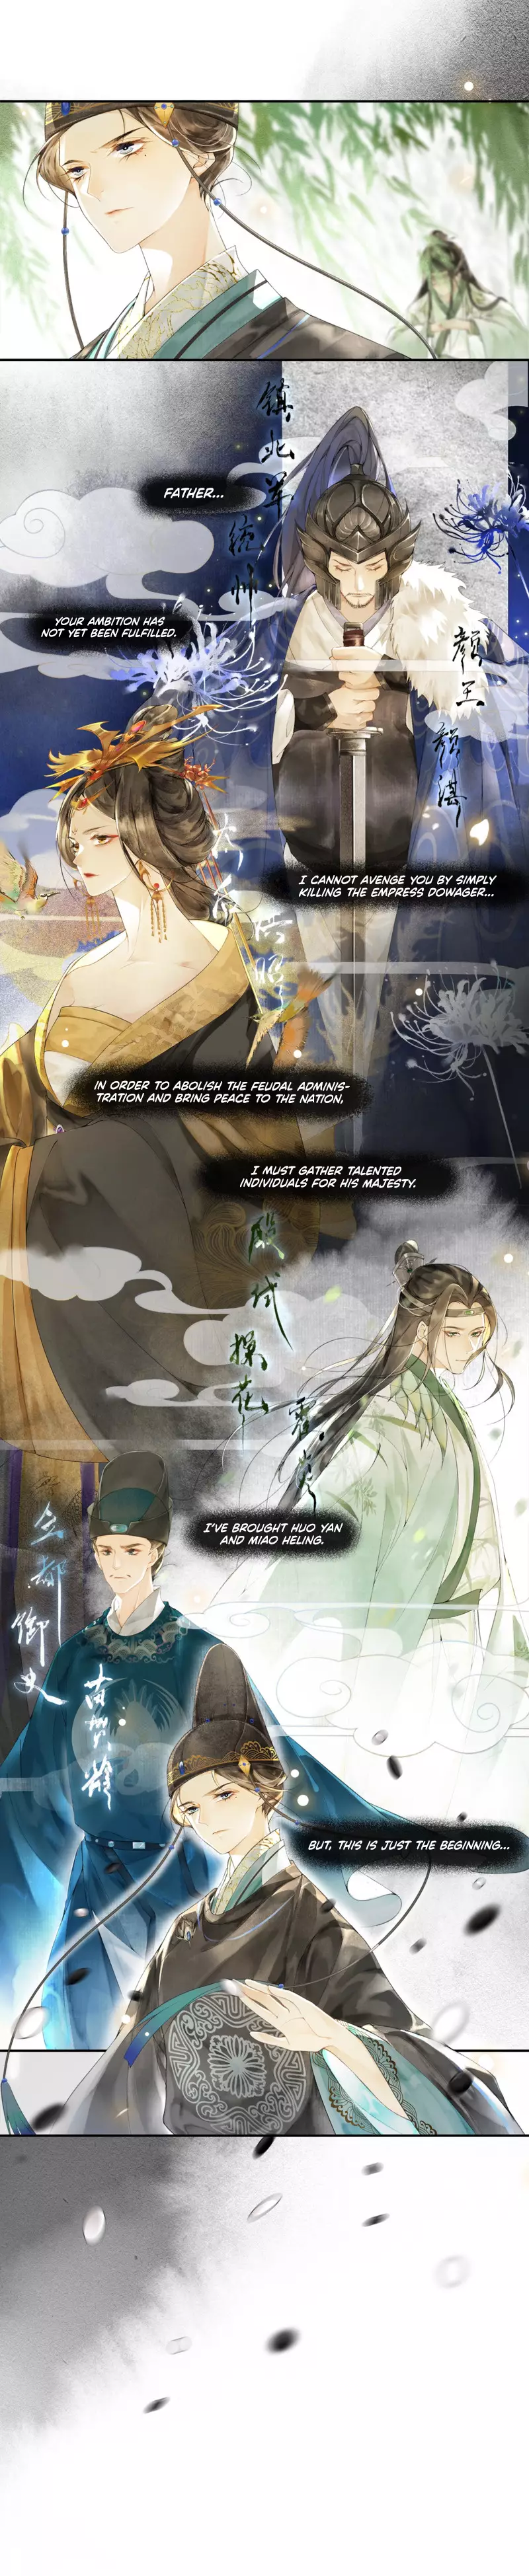 The Chronicles Of Qing Xi - 12 page 9-198c1eea